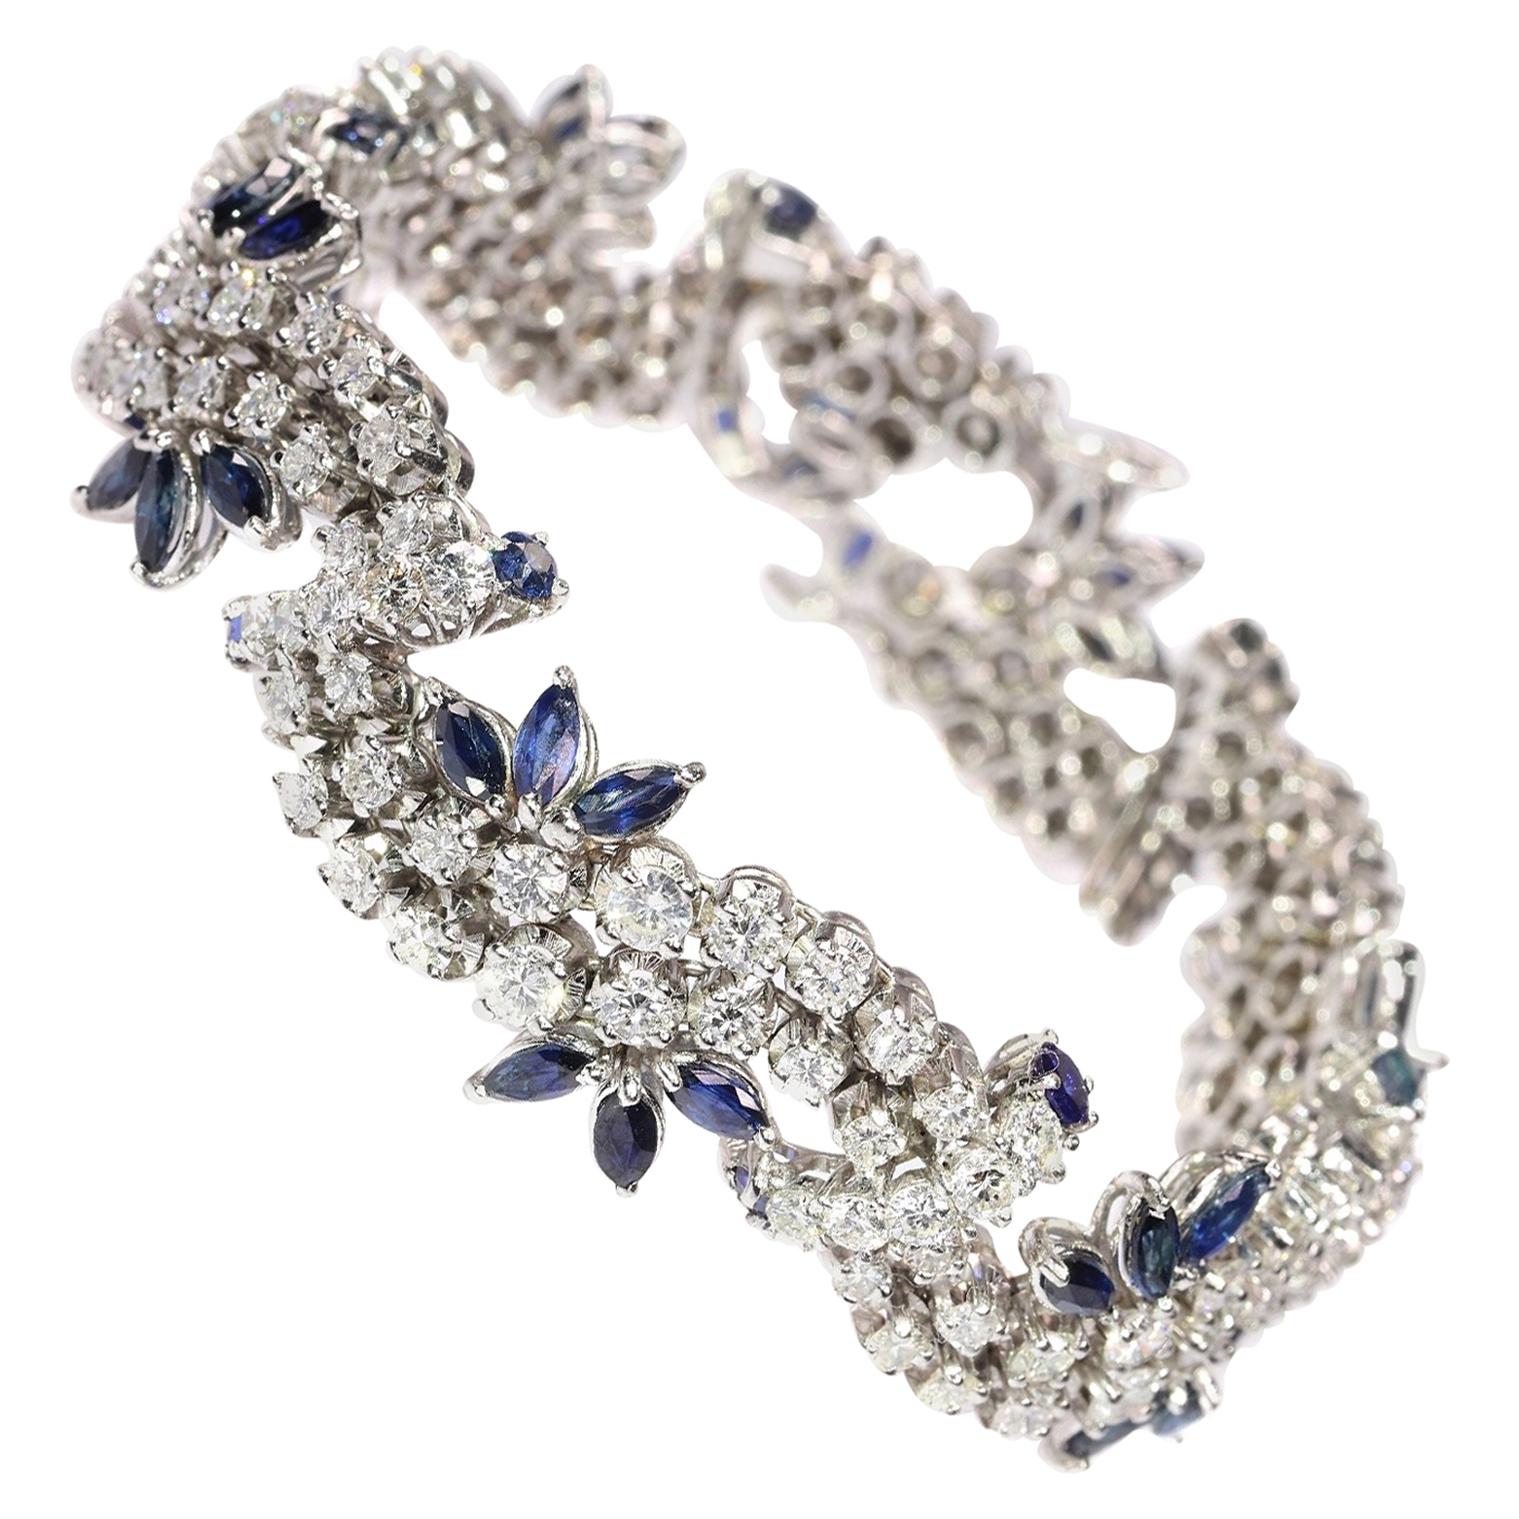 Vintage Bracelet Loaded with Diamonds and Sapphires